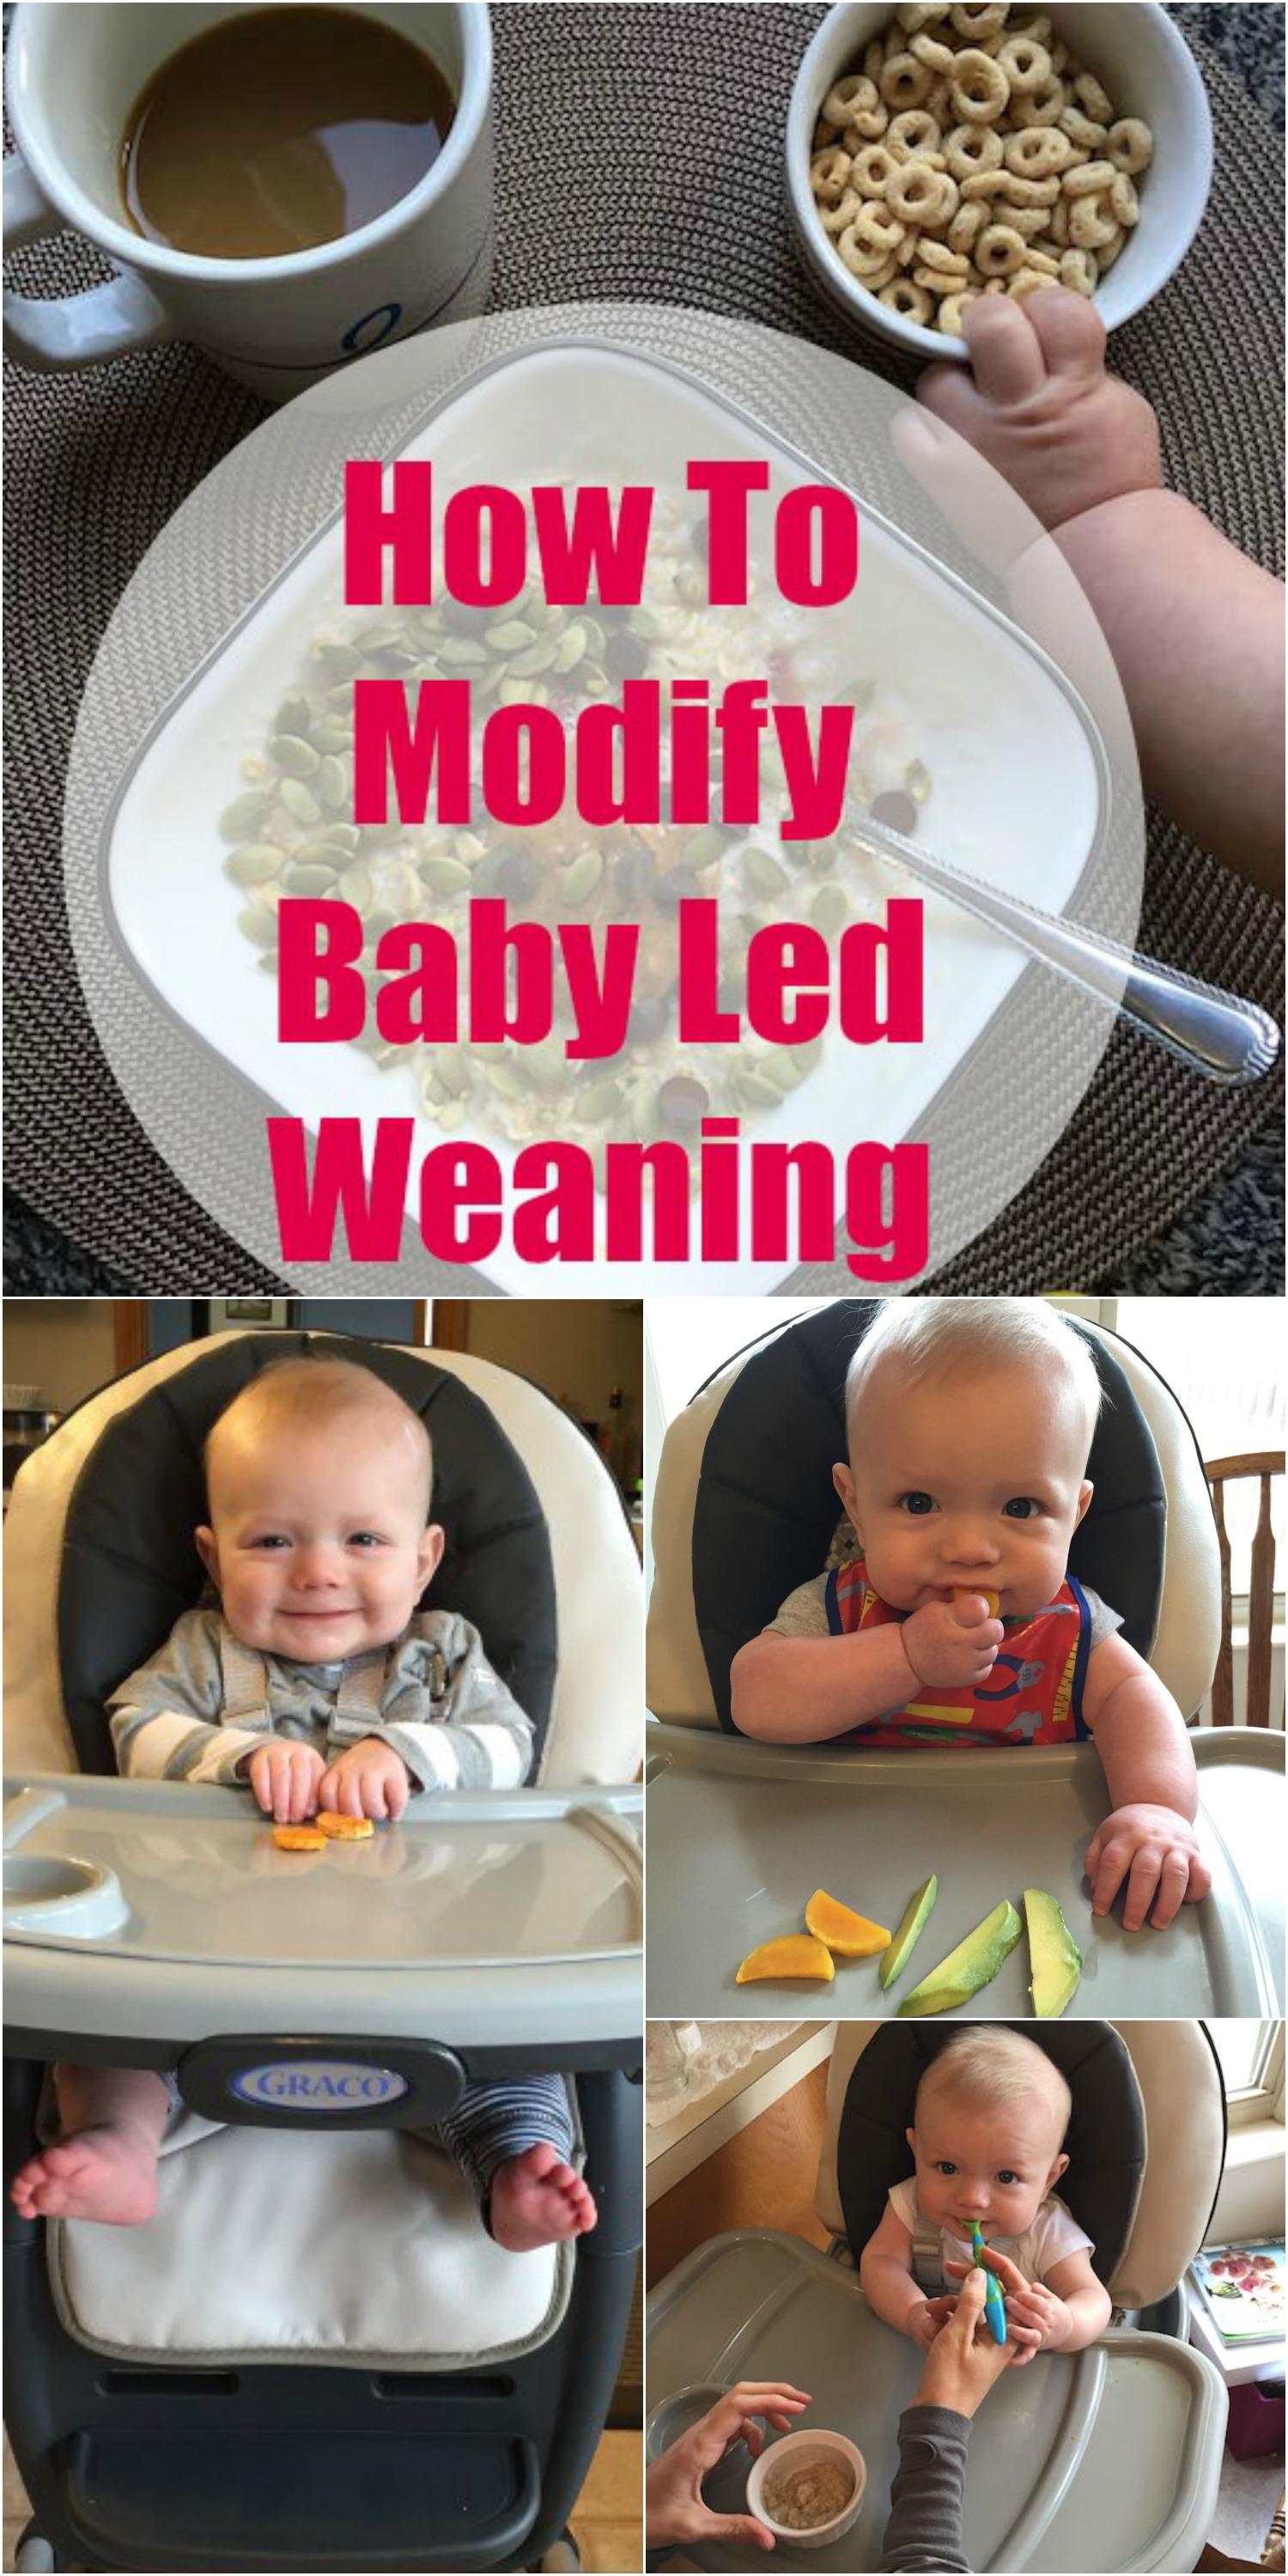 How To Modify Baby Led Weaning